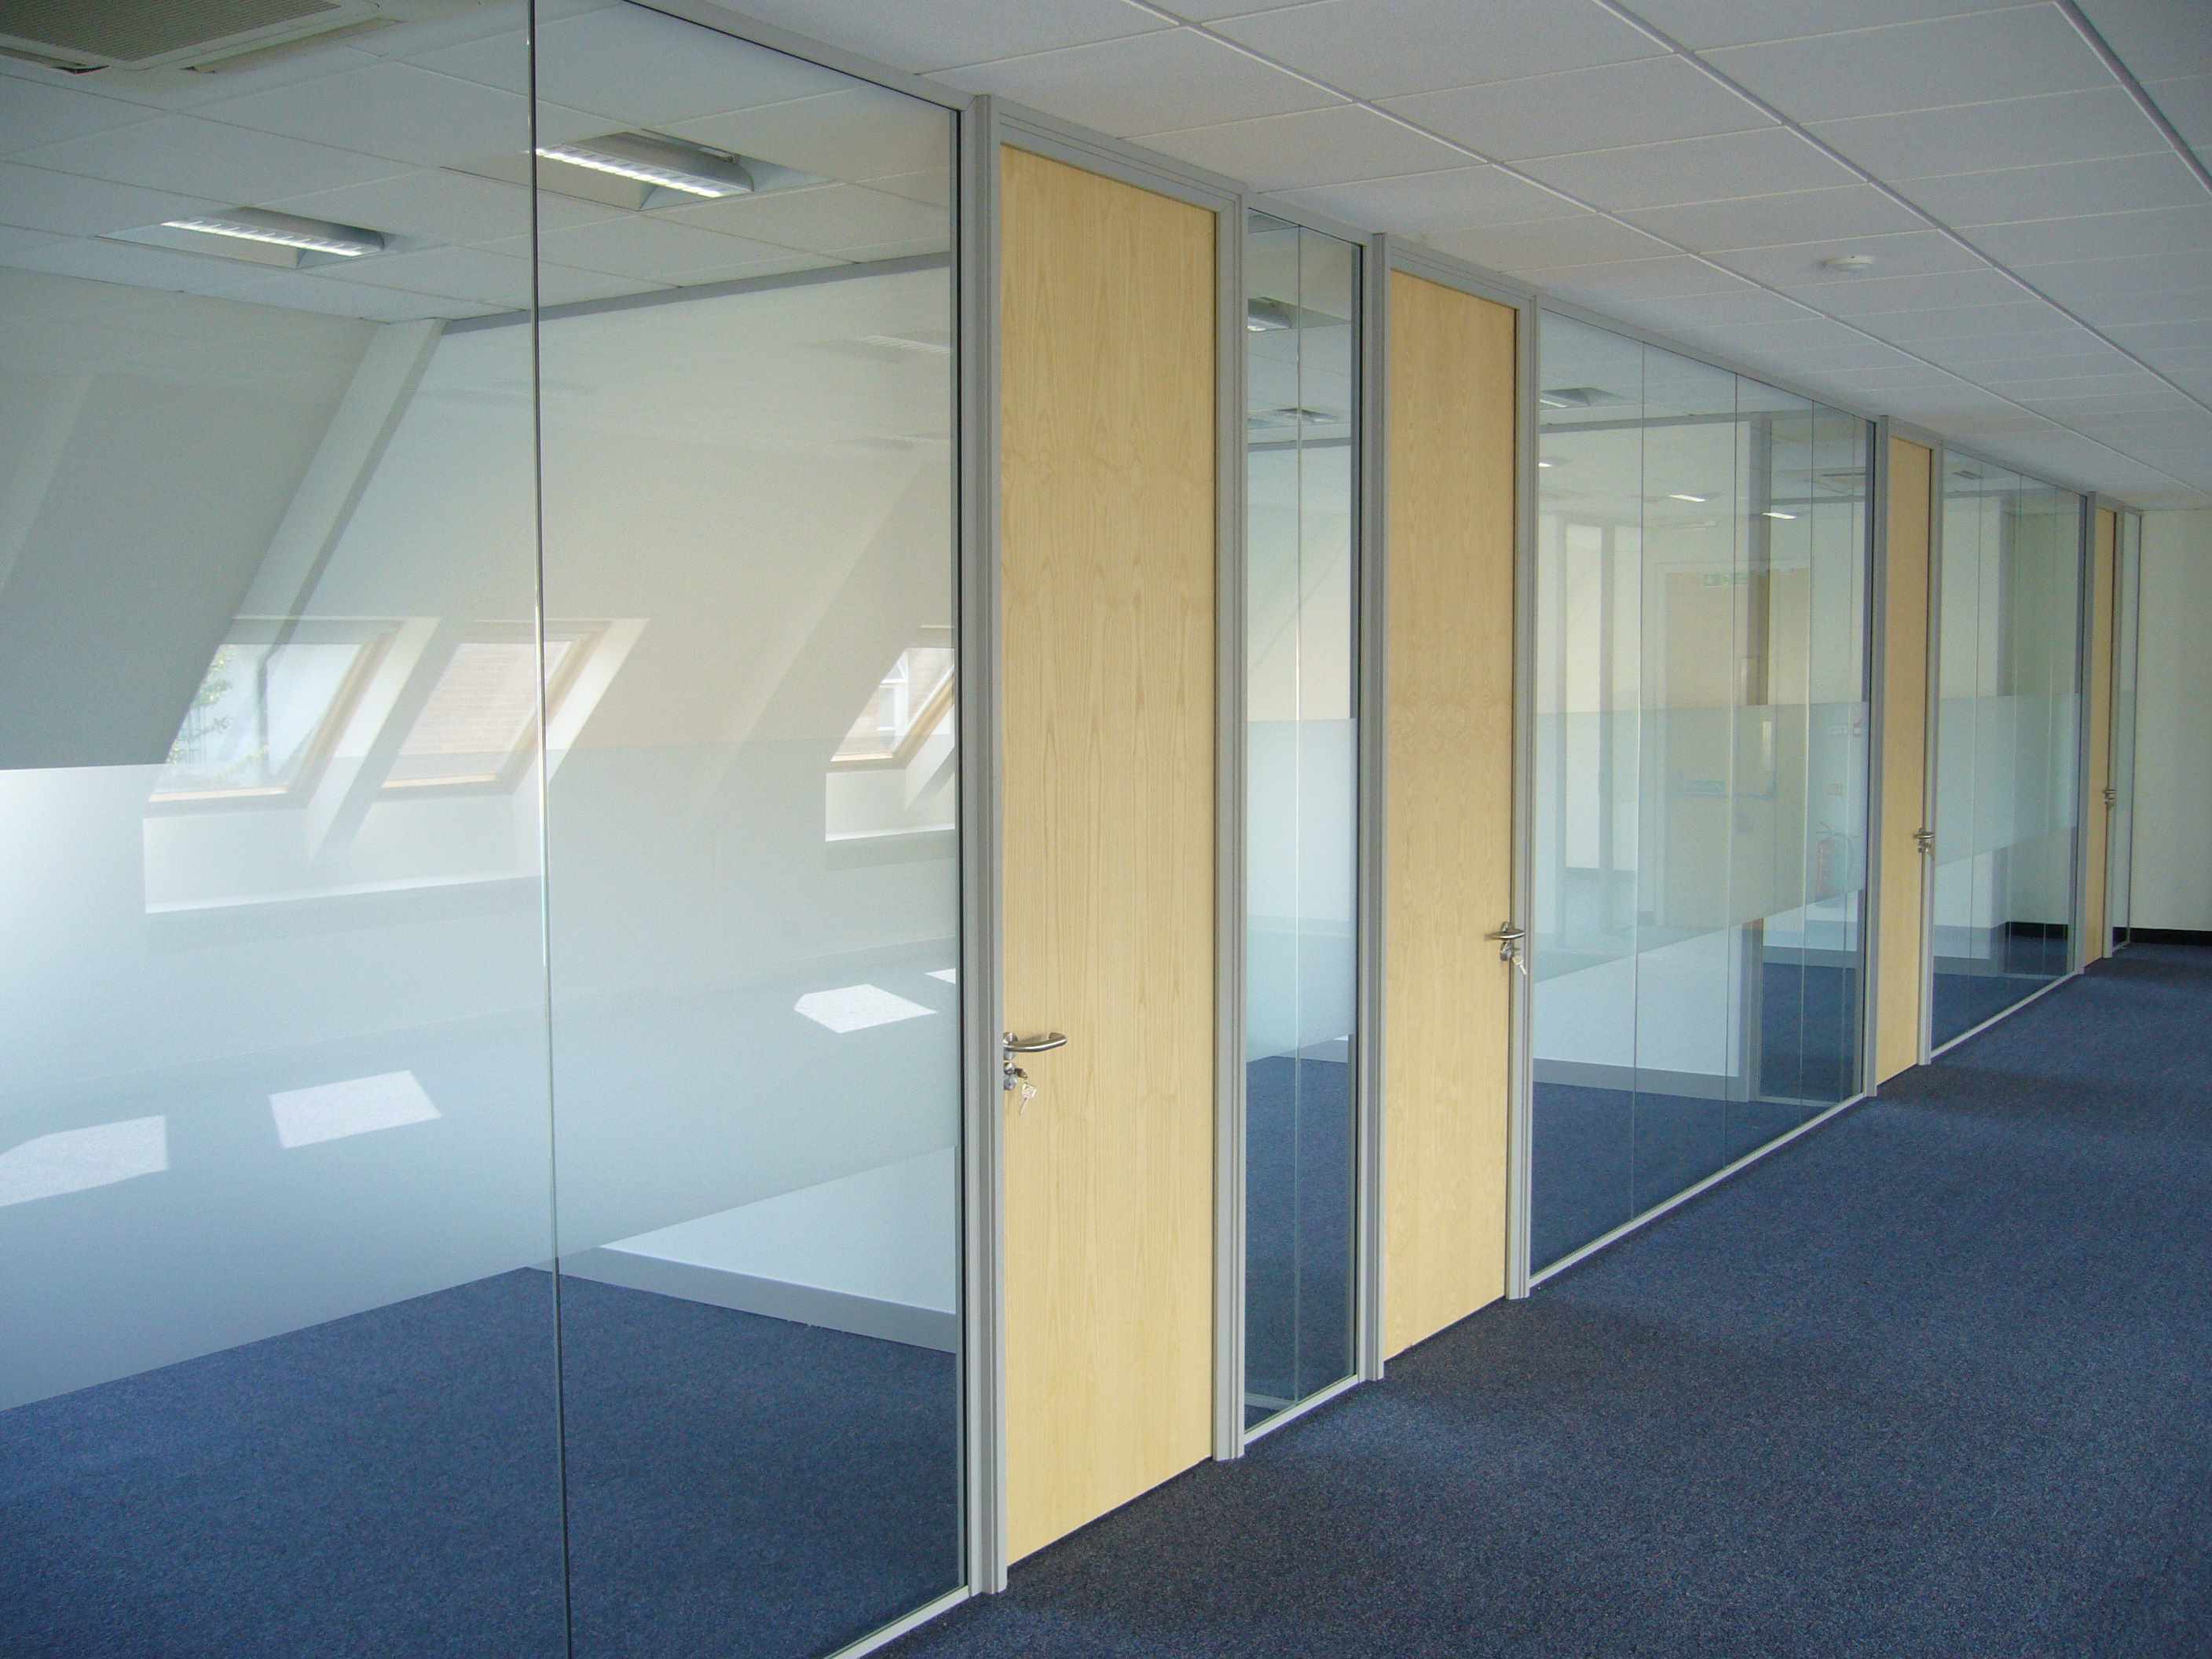 Main image for Clifford Partitioning Co. Ltd